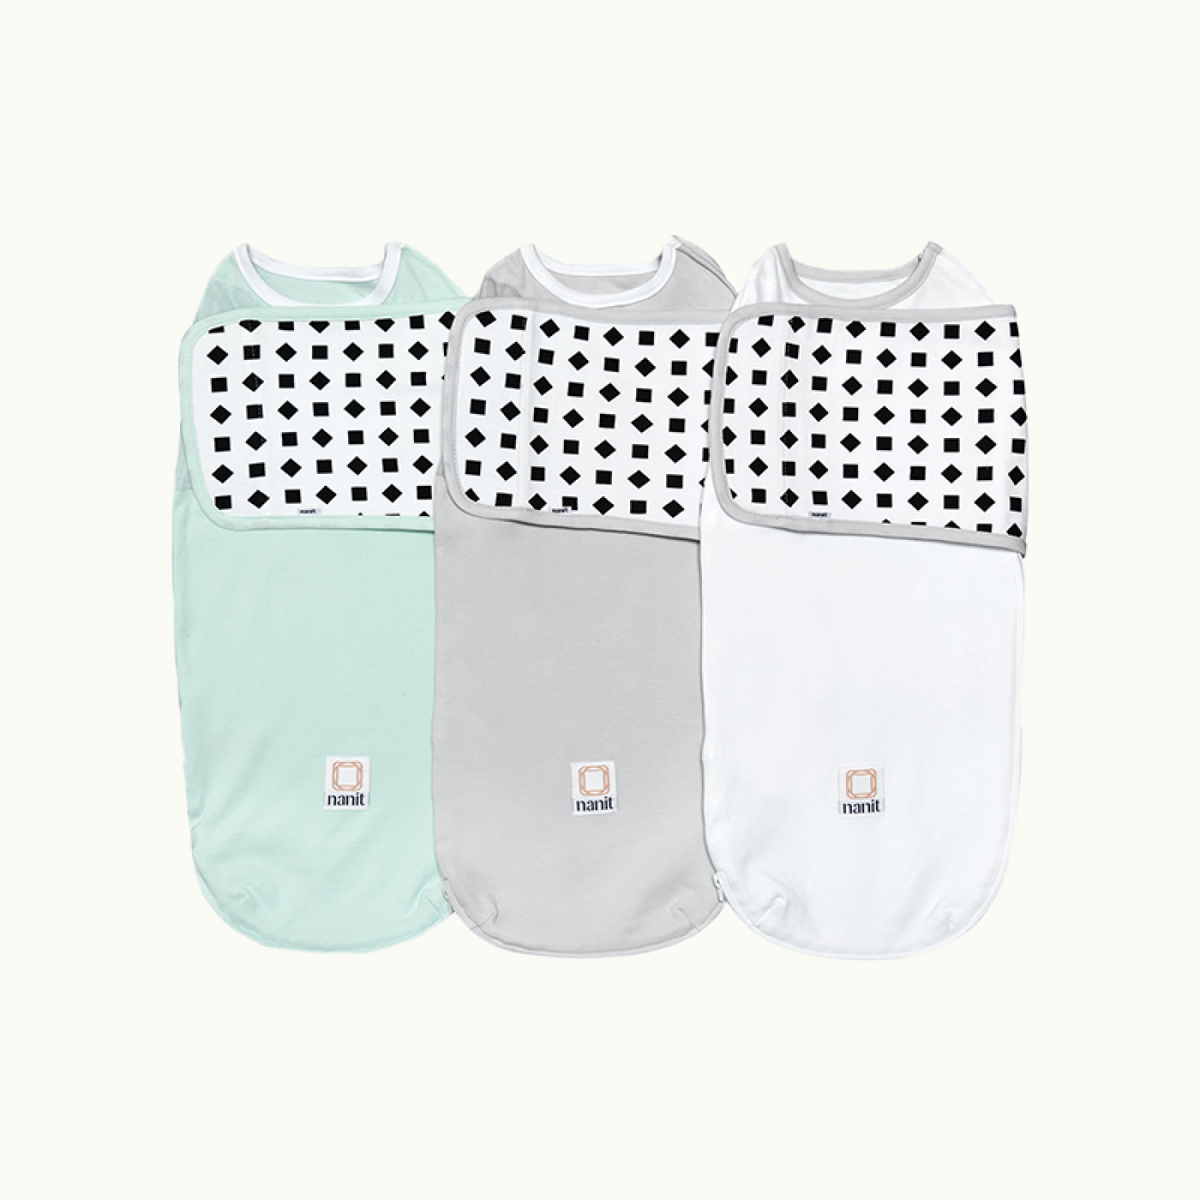 nanit swaddle in green, gray, and white #color_multi